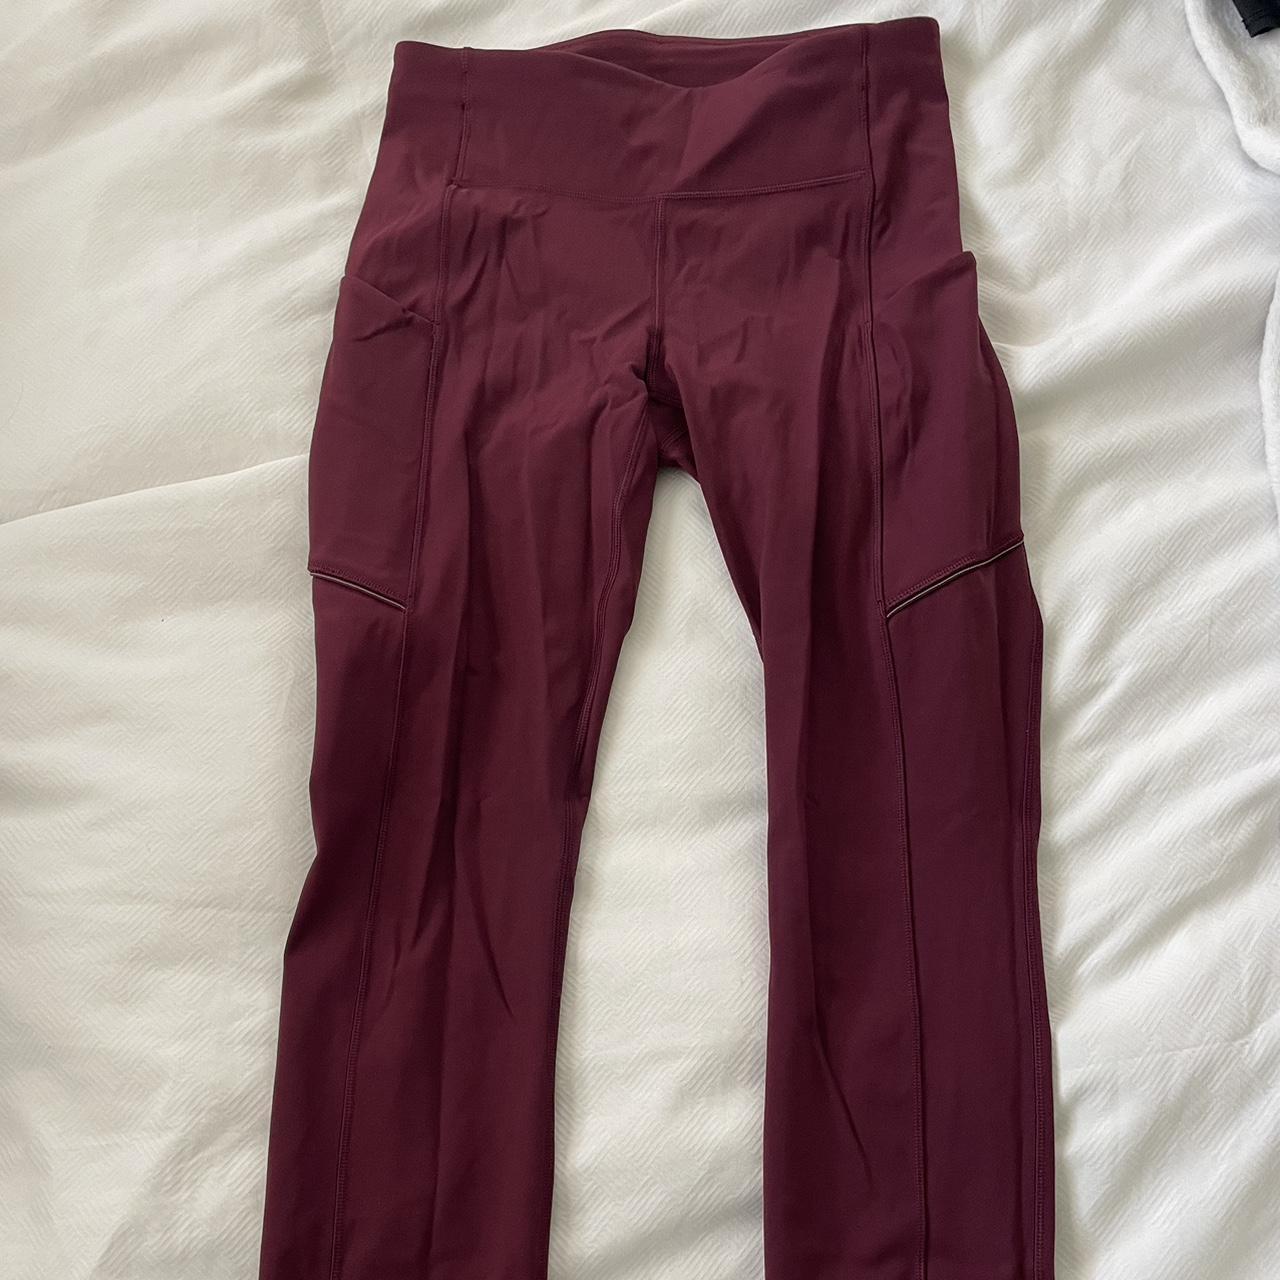 Lululemon Leggings with two side pockets and a back